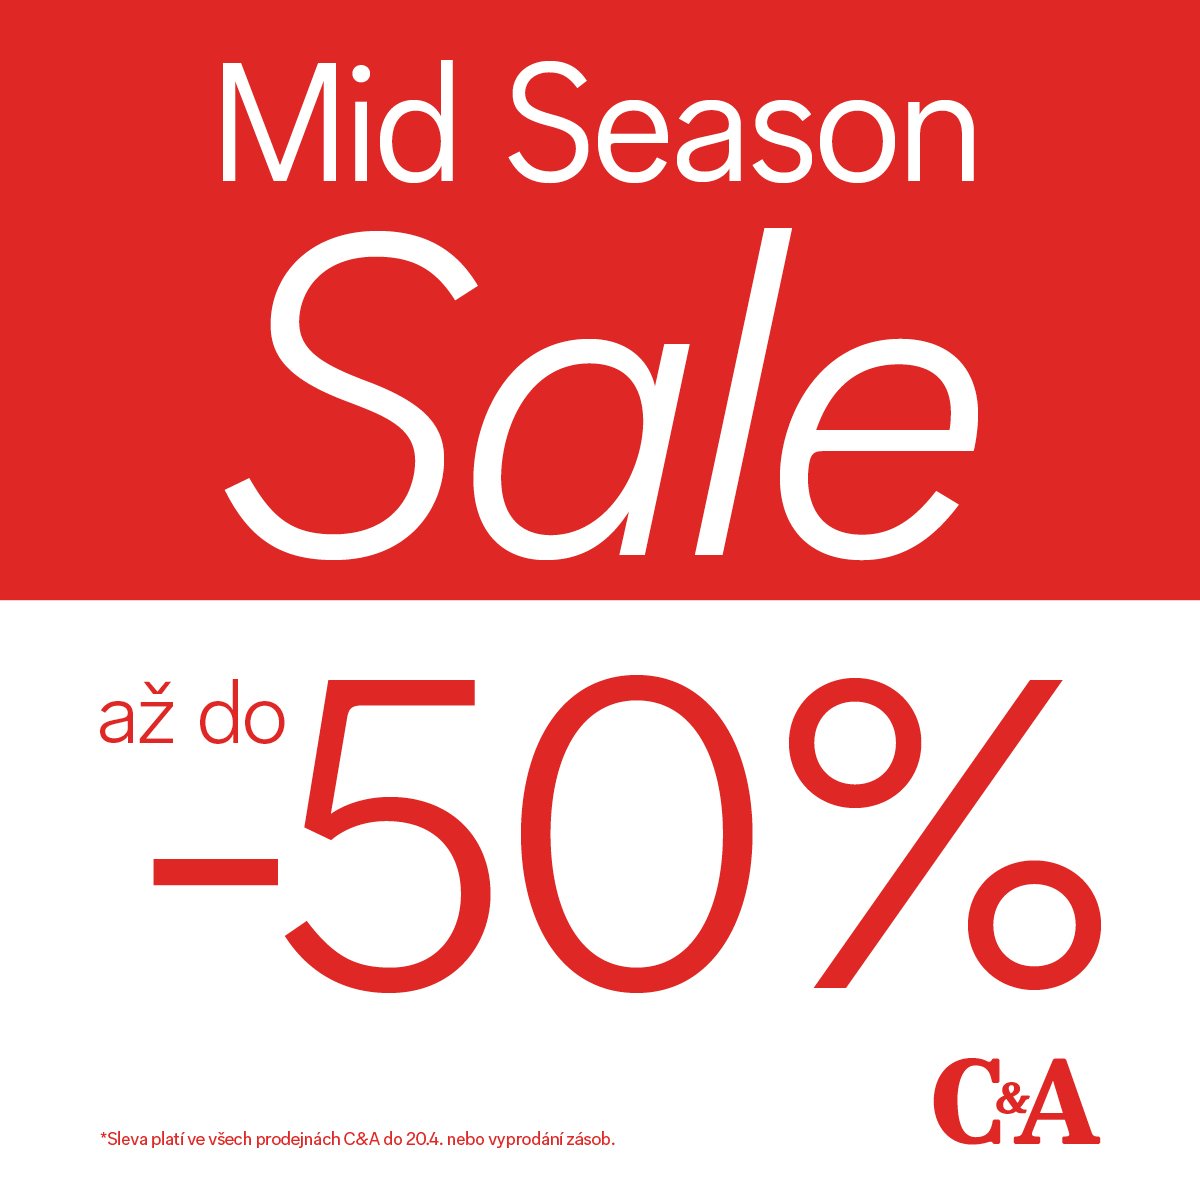 MID SEASON SALE DISCOUNTS UP TO 50% on selected goods